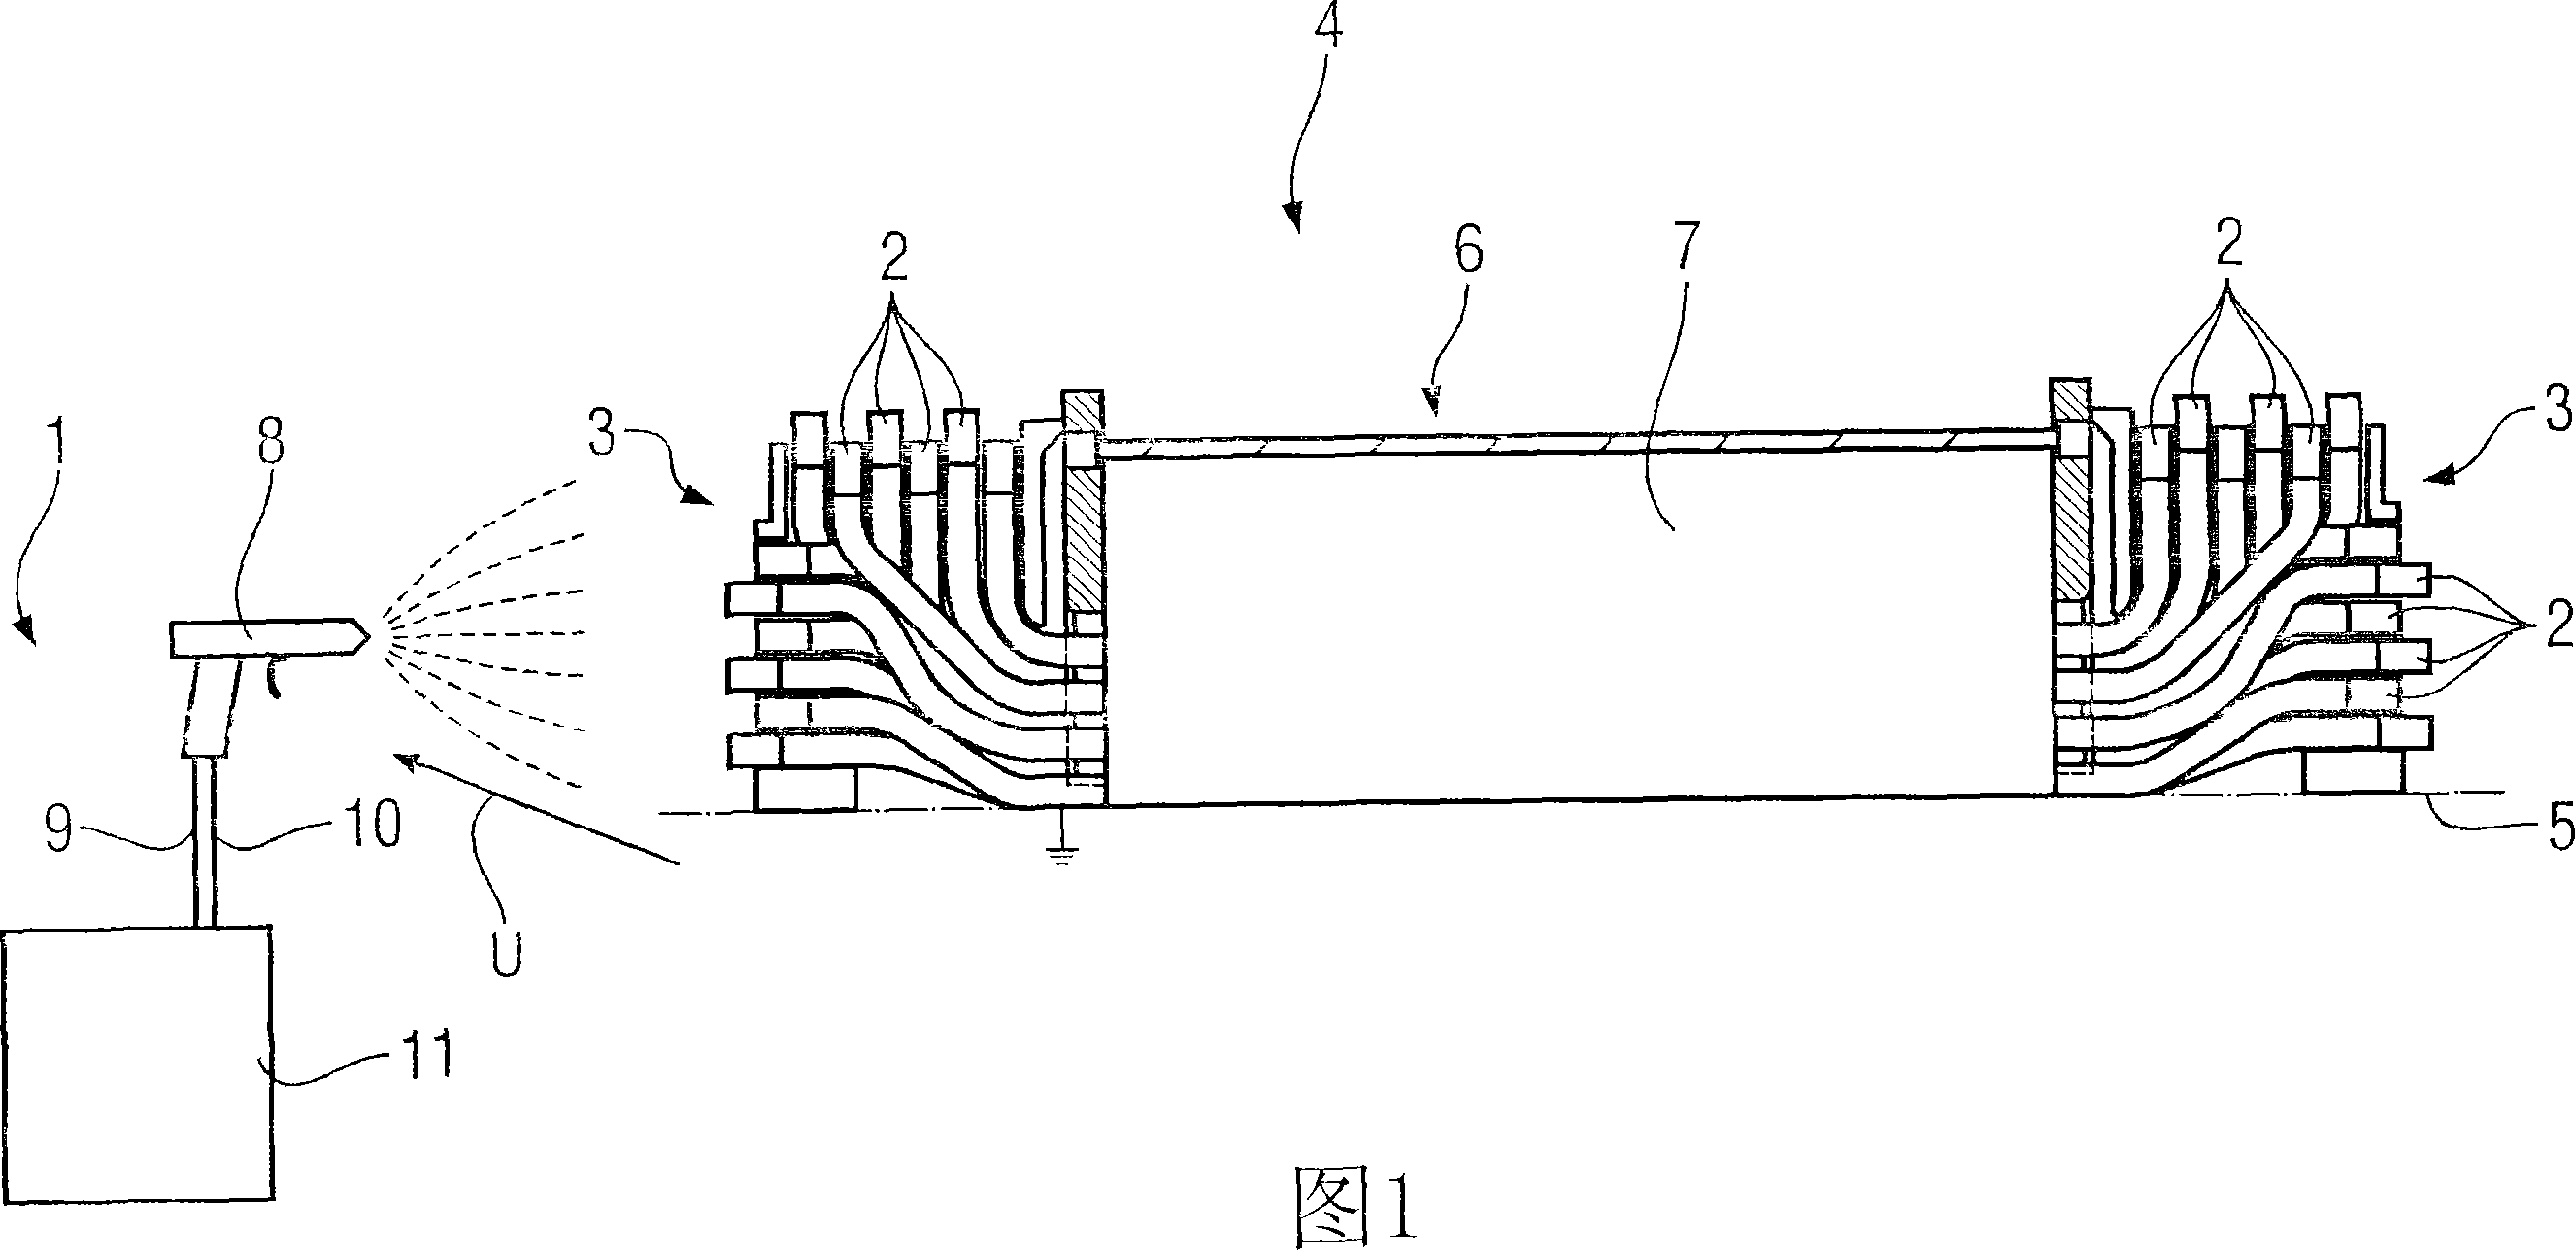 Coating method for an end winding of an electric motor